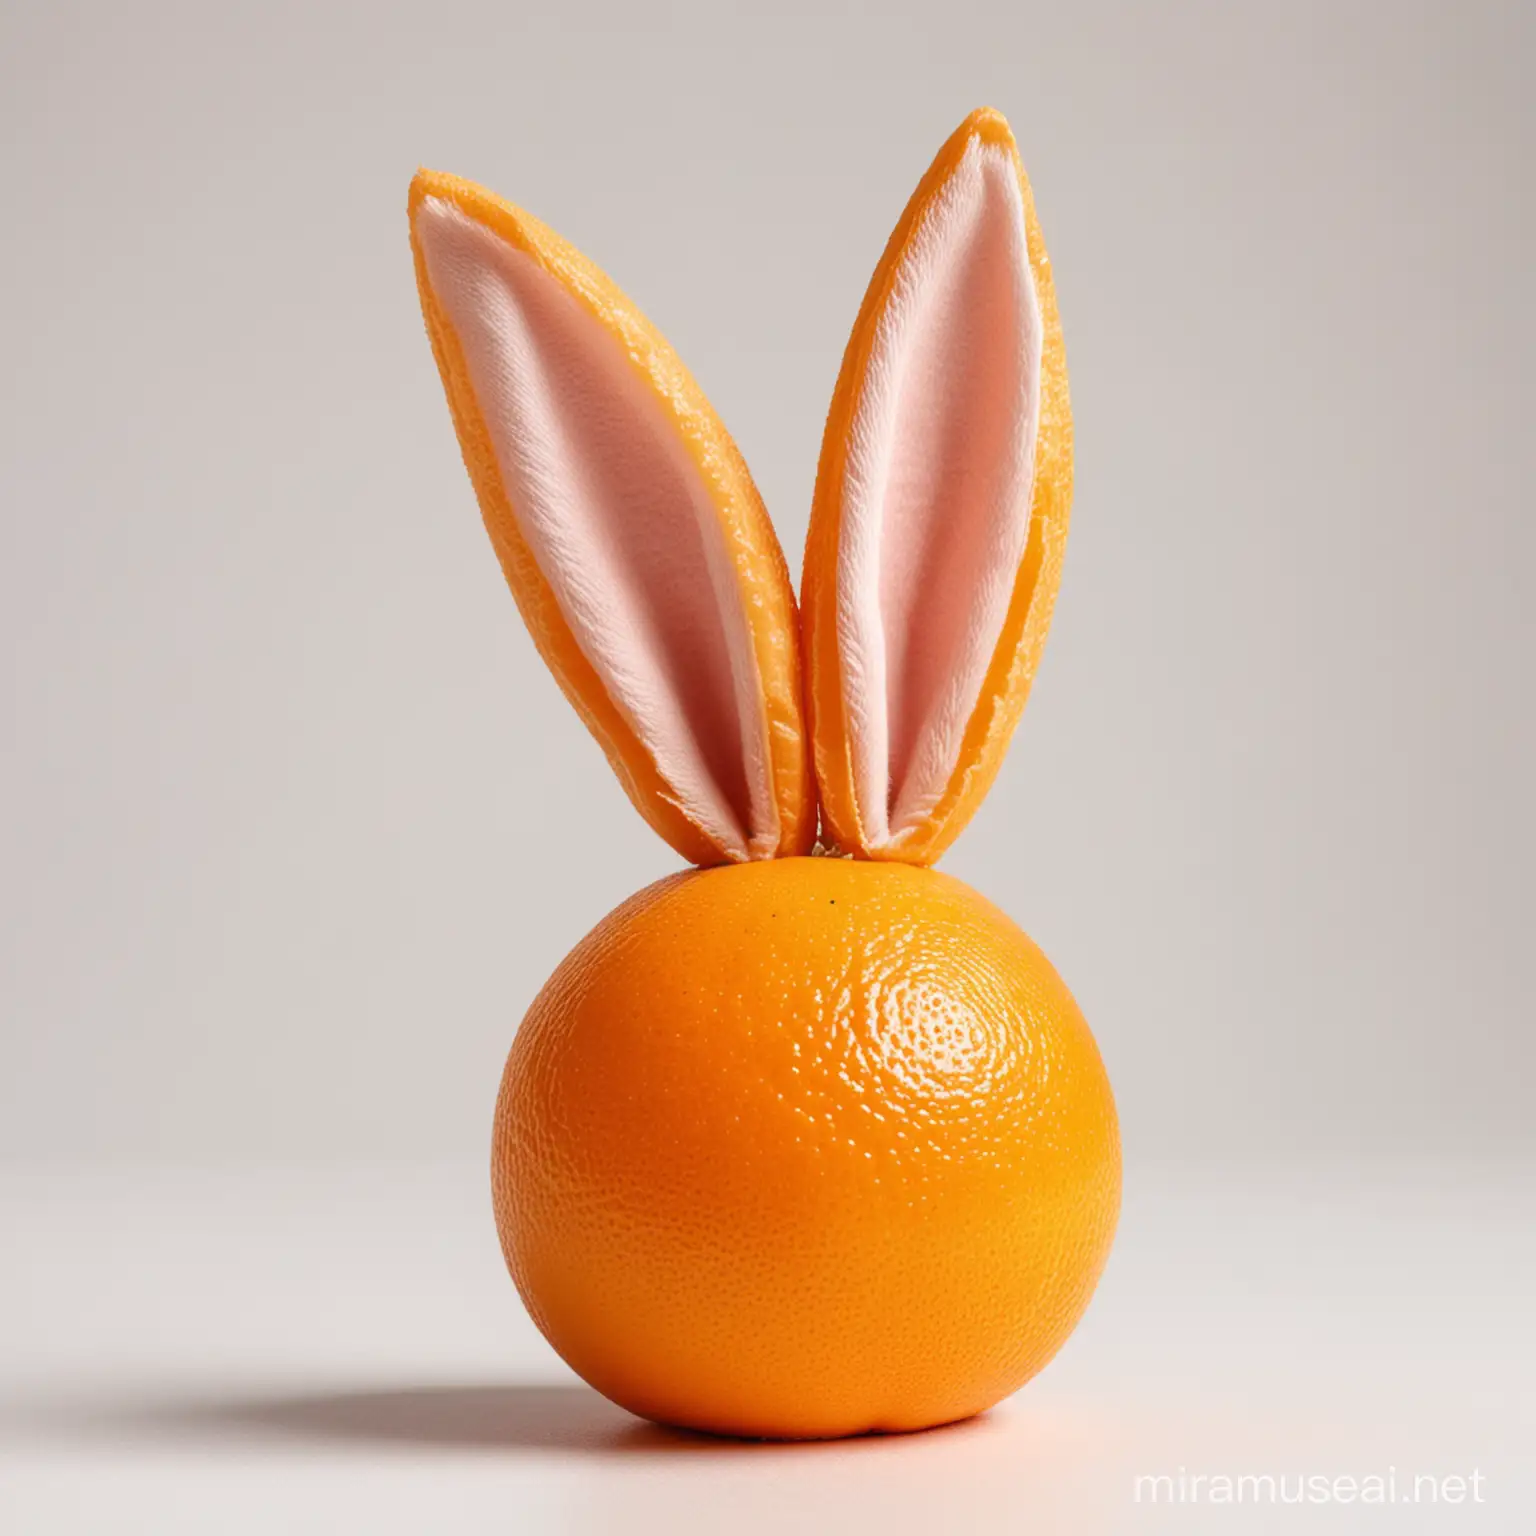 Juicy Orange with Playful Rabbit Ears on Pure White Background